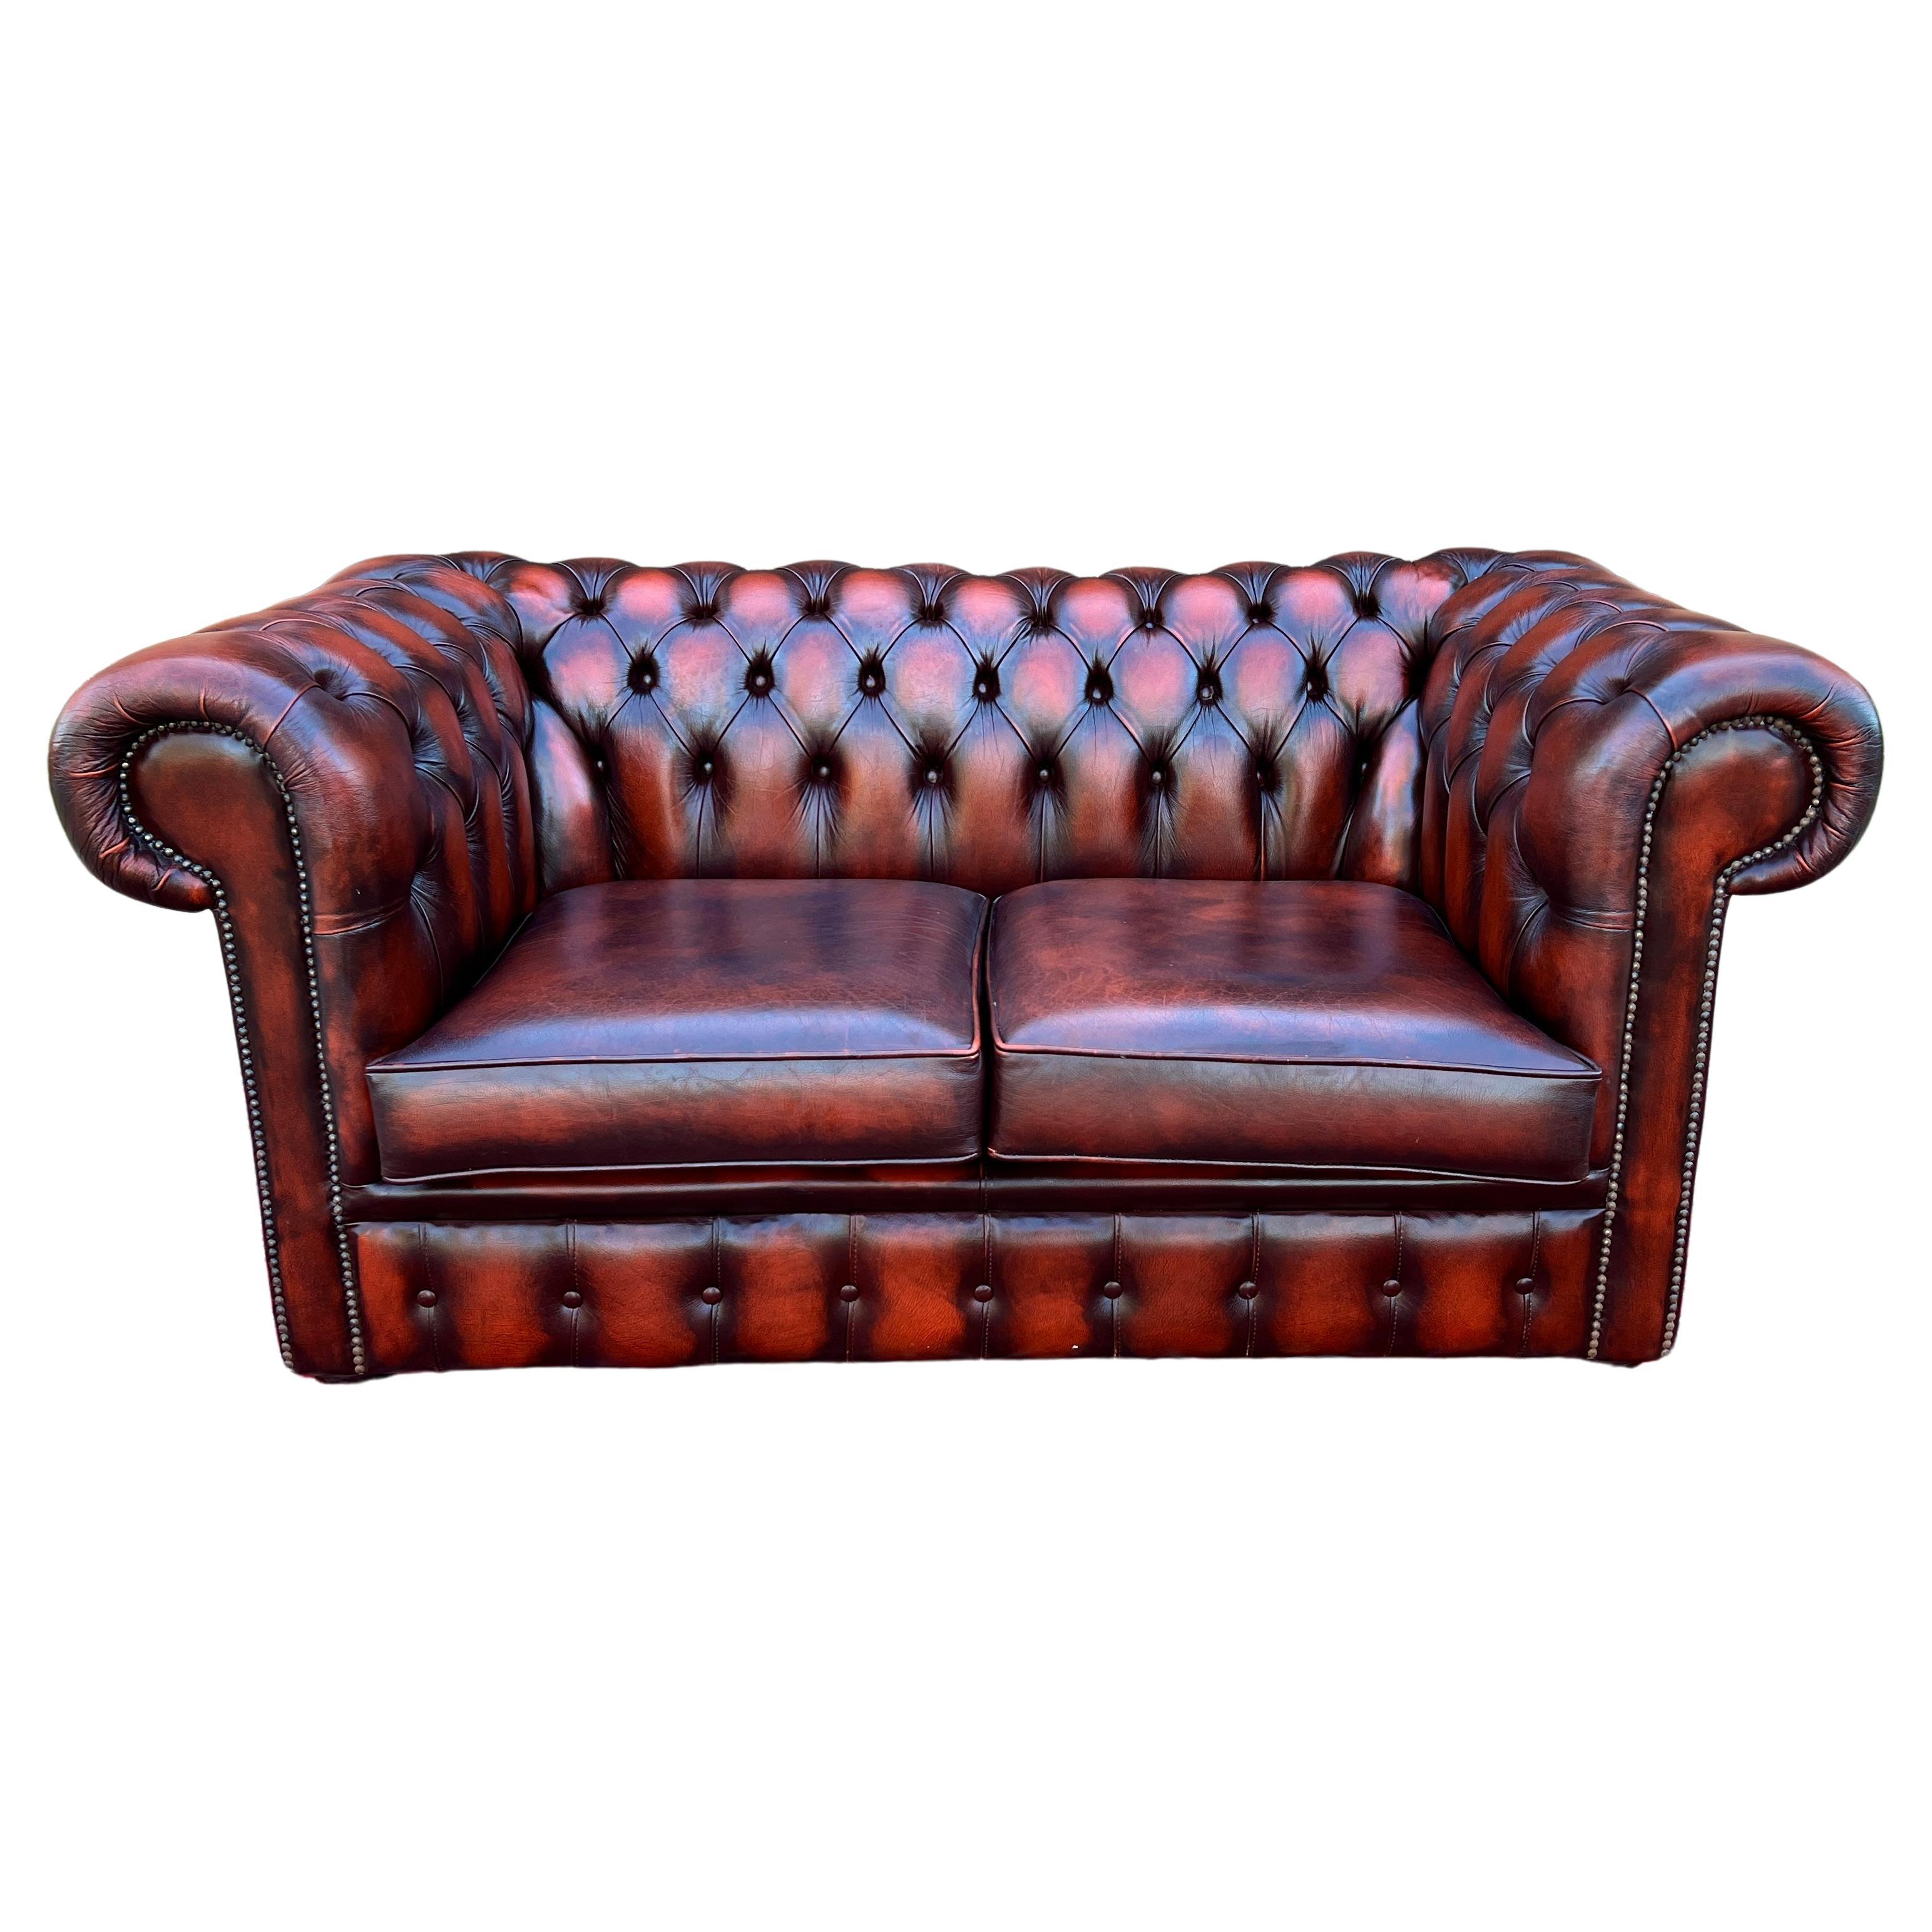 Vintage English Chesterfield Leather Tufted Love Seat Sofa Oxblood Red #1 For Sale